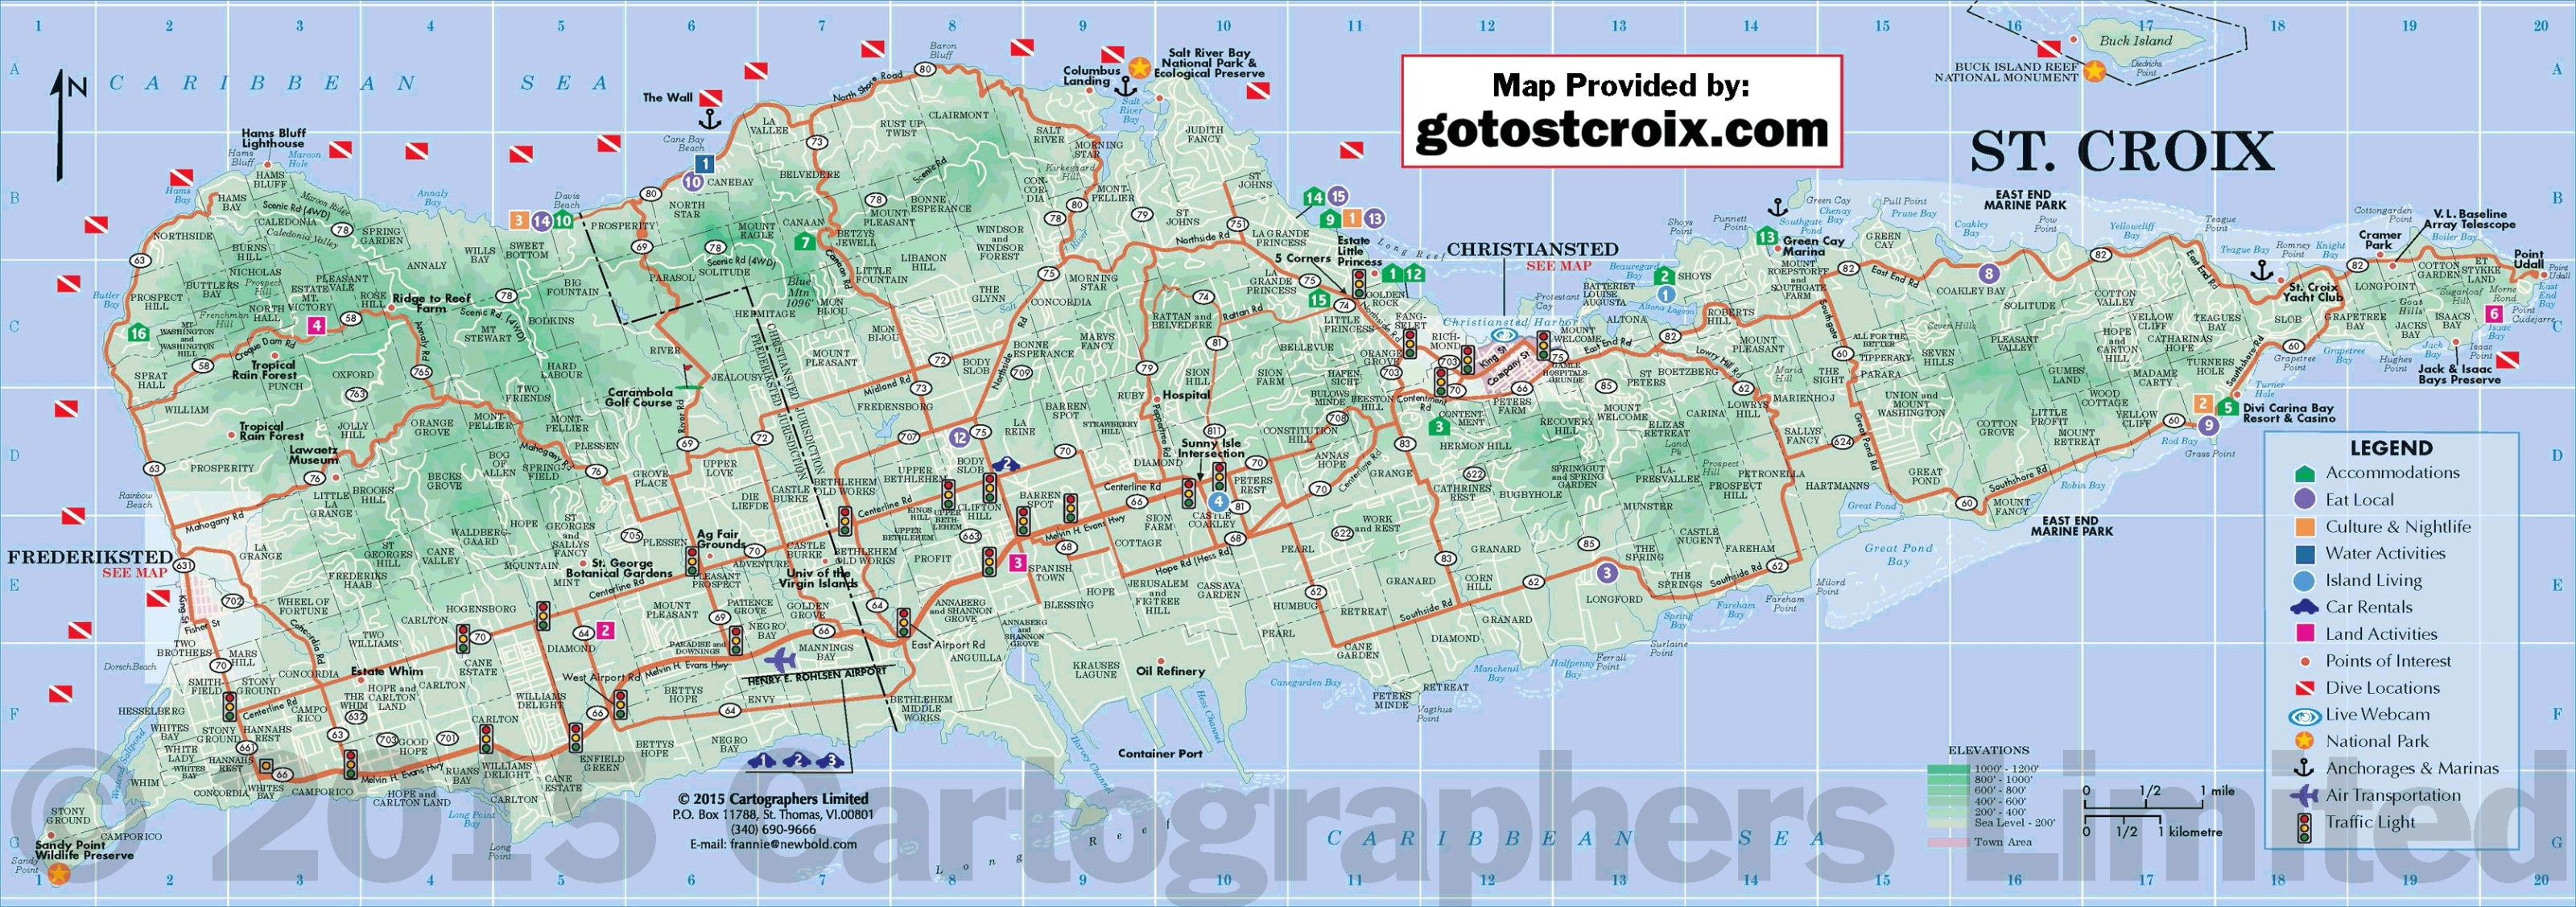 where is st croix located?